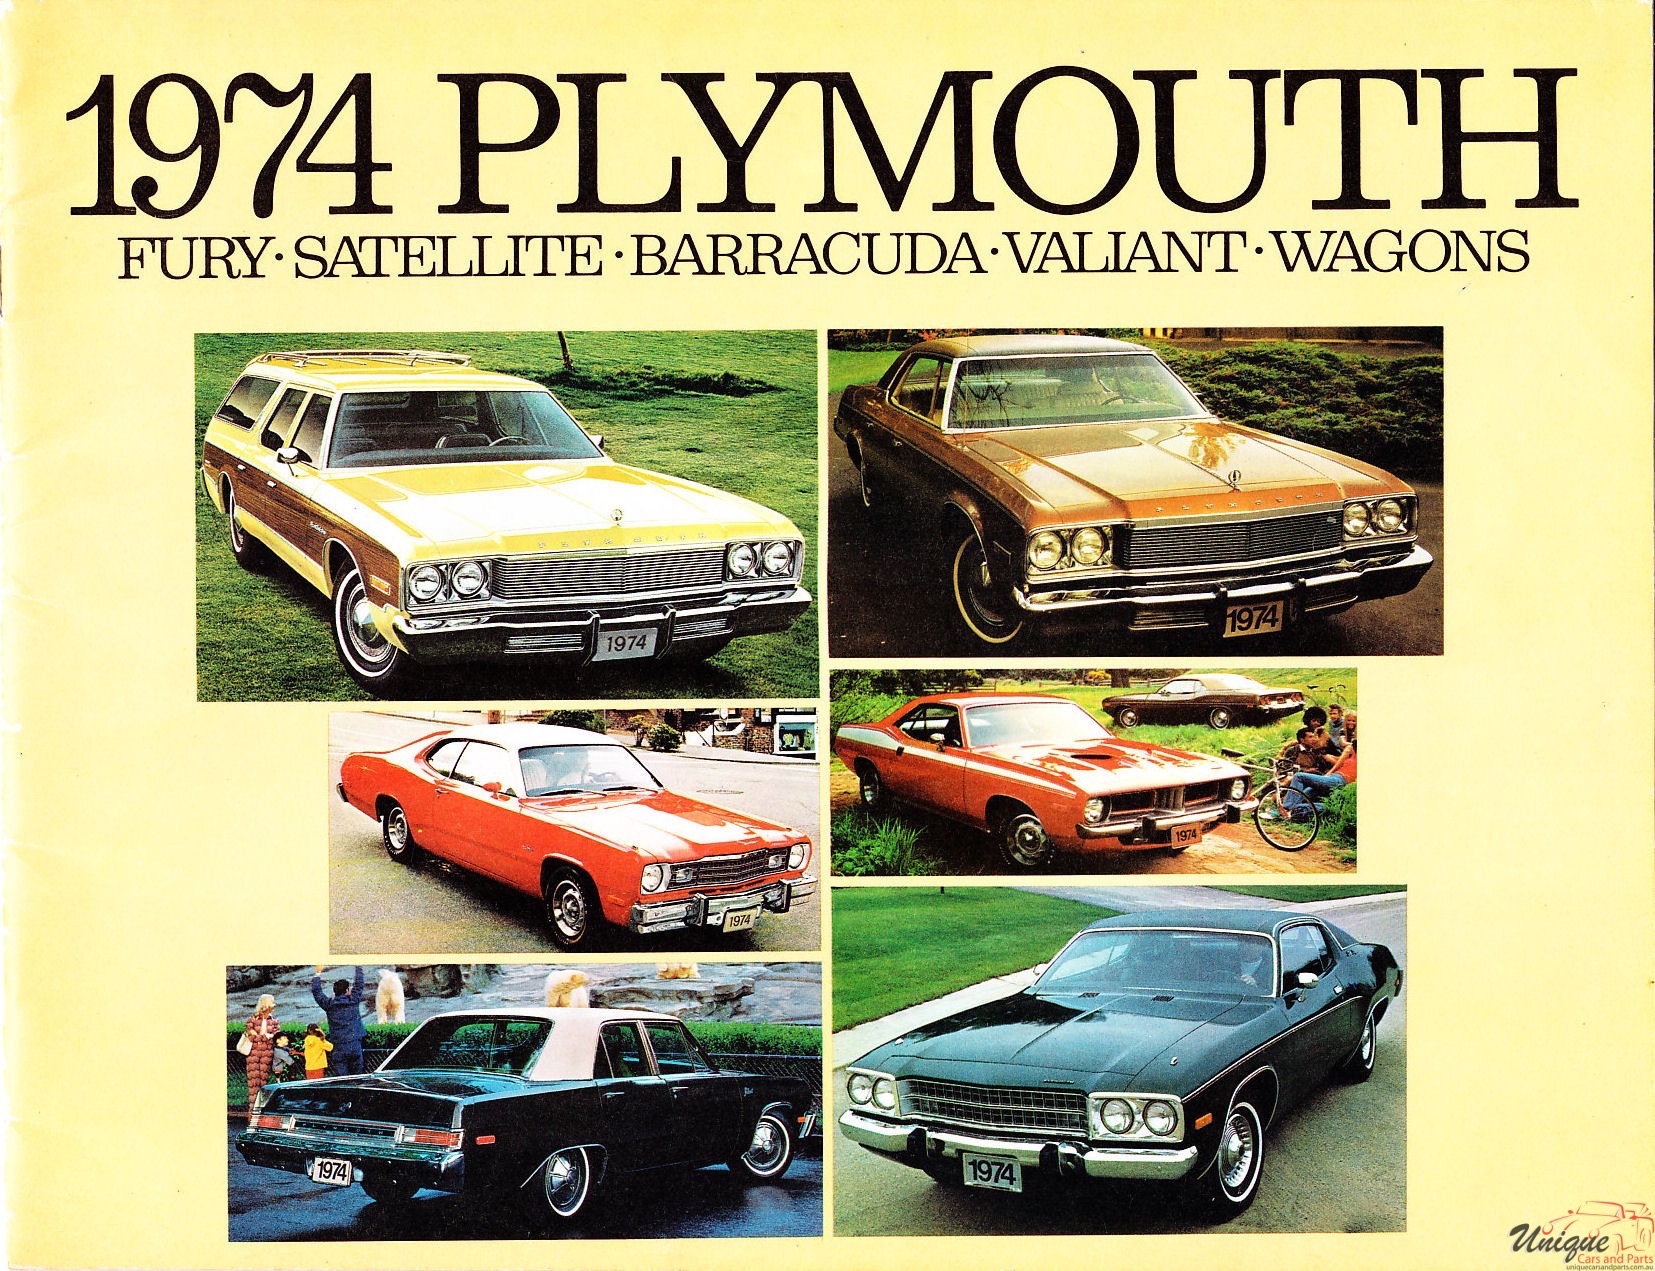 1974 Plymouth Full-Line Brochure Page 1